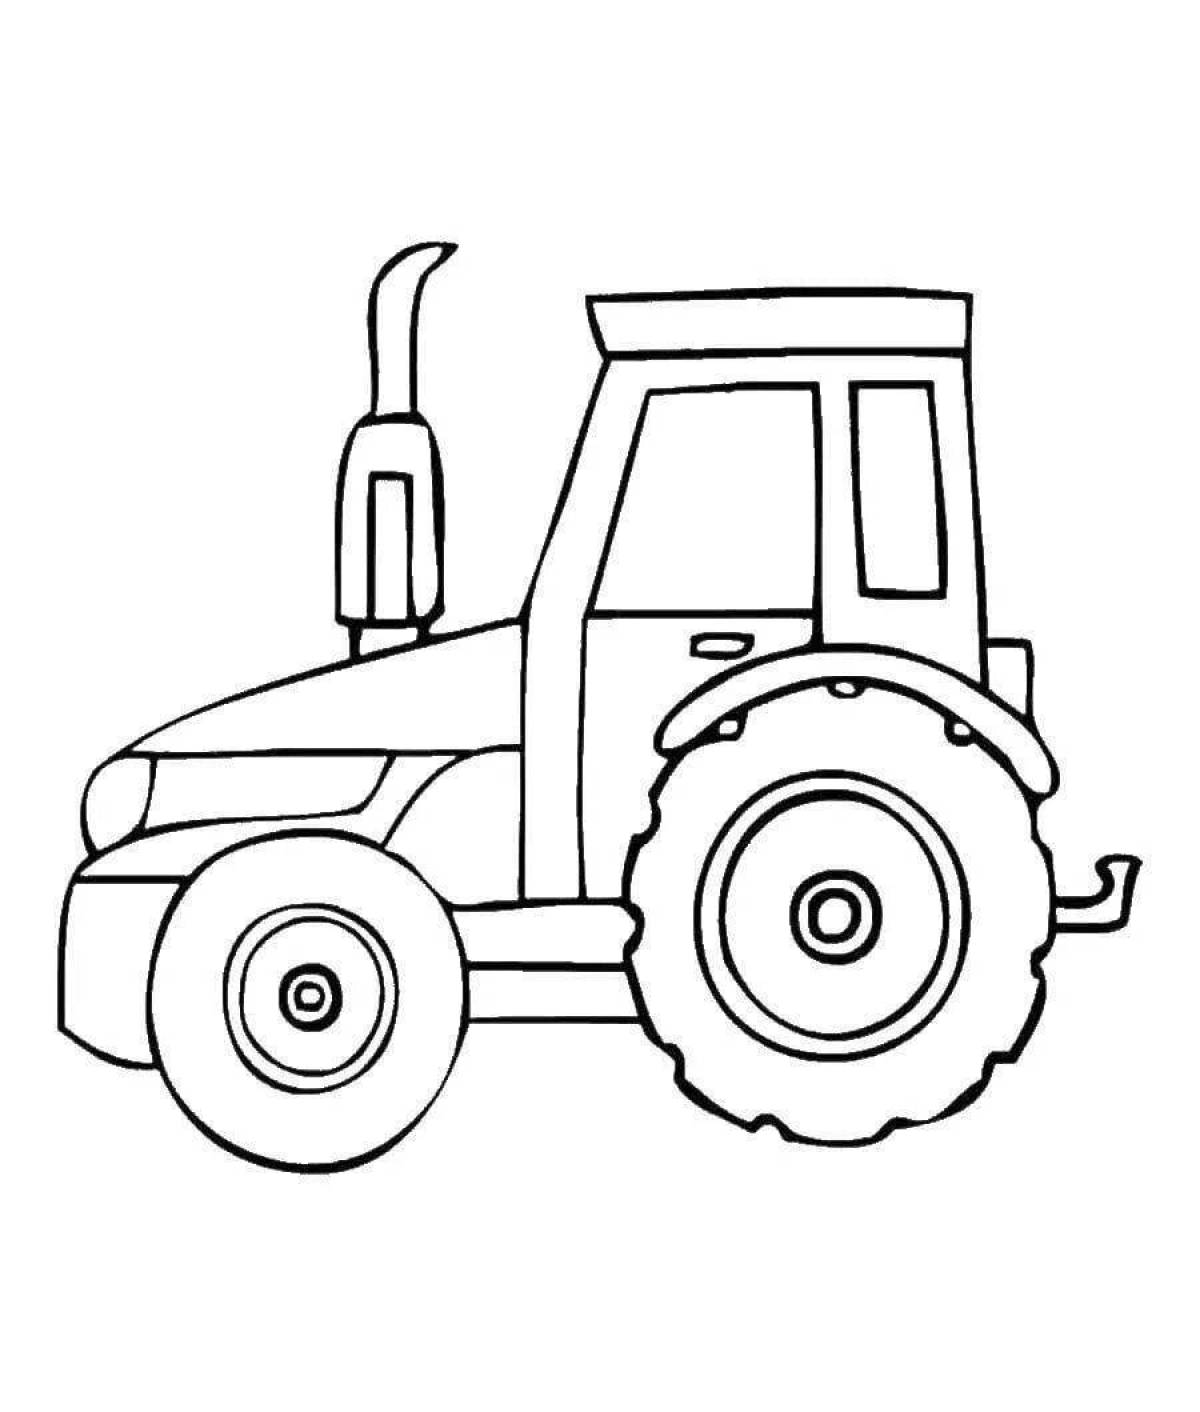 Violent tractor coloring page